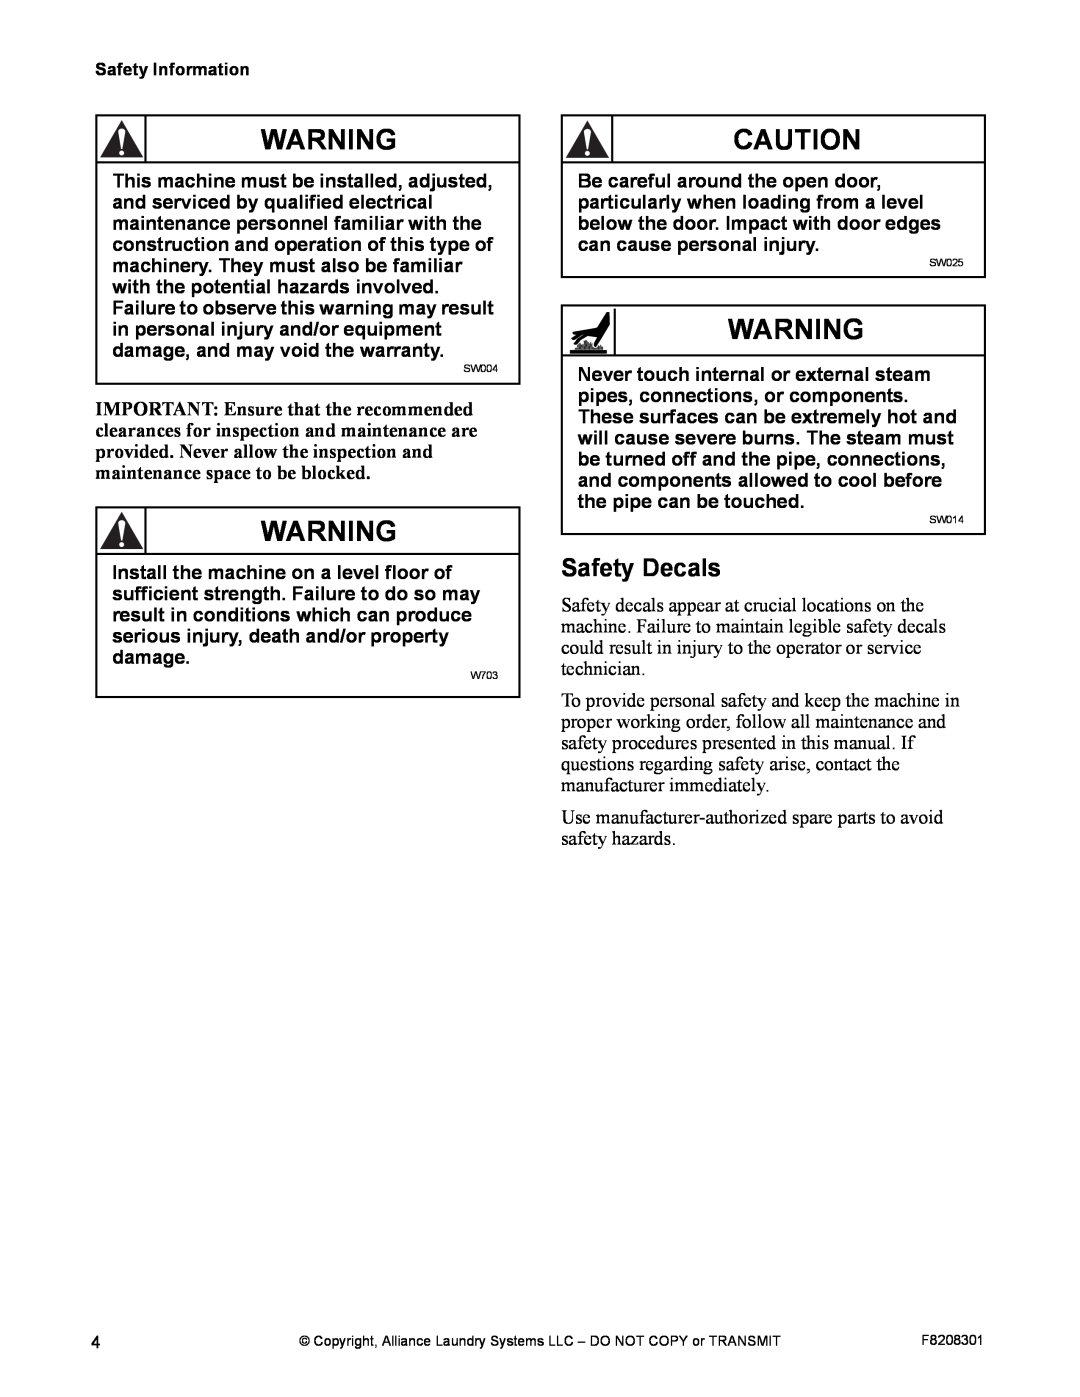 Alliance Laundry Systems CHM1772C manual Safety Decals 